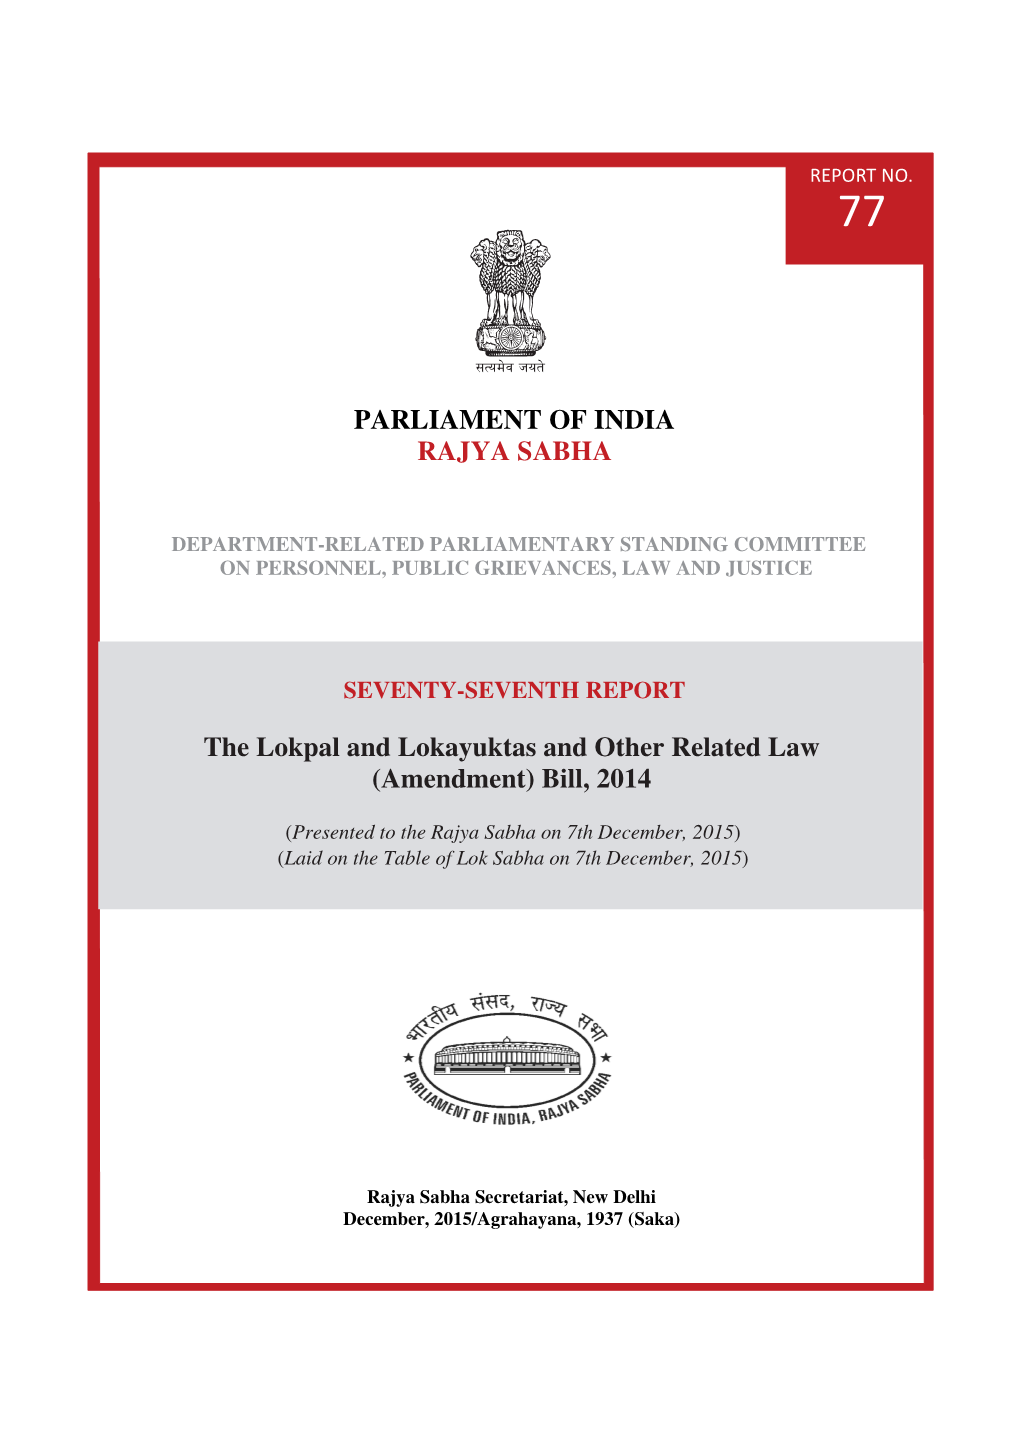 Parliamentary Standing Committee on Personnel, Public Grievances, Law and Justice Gave Its Recommendations